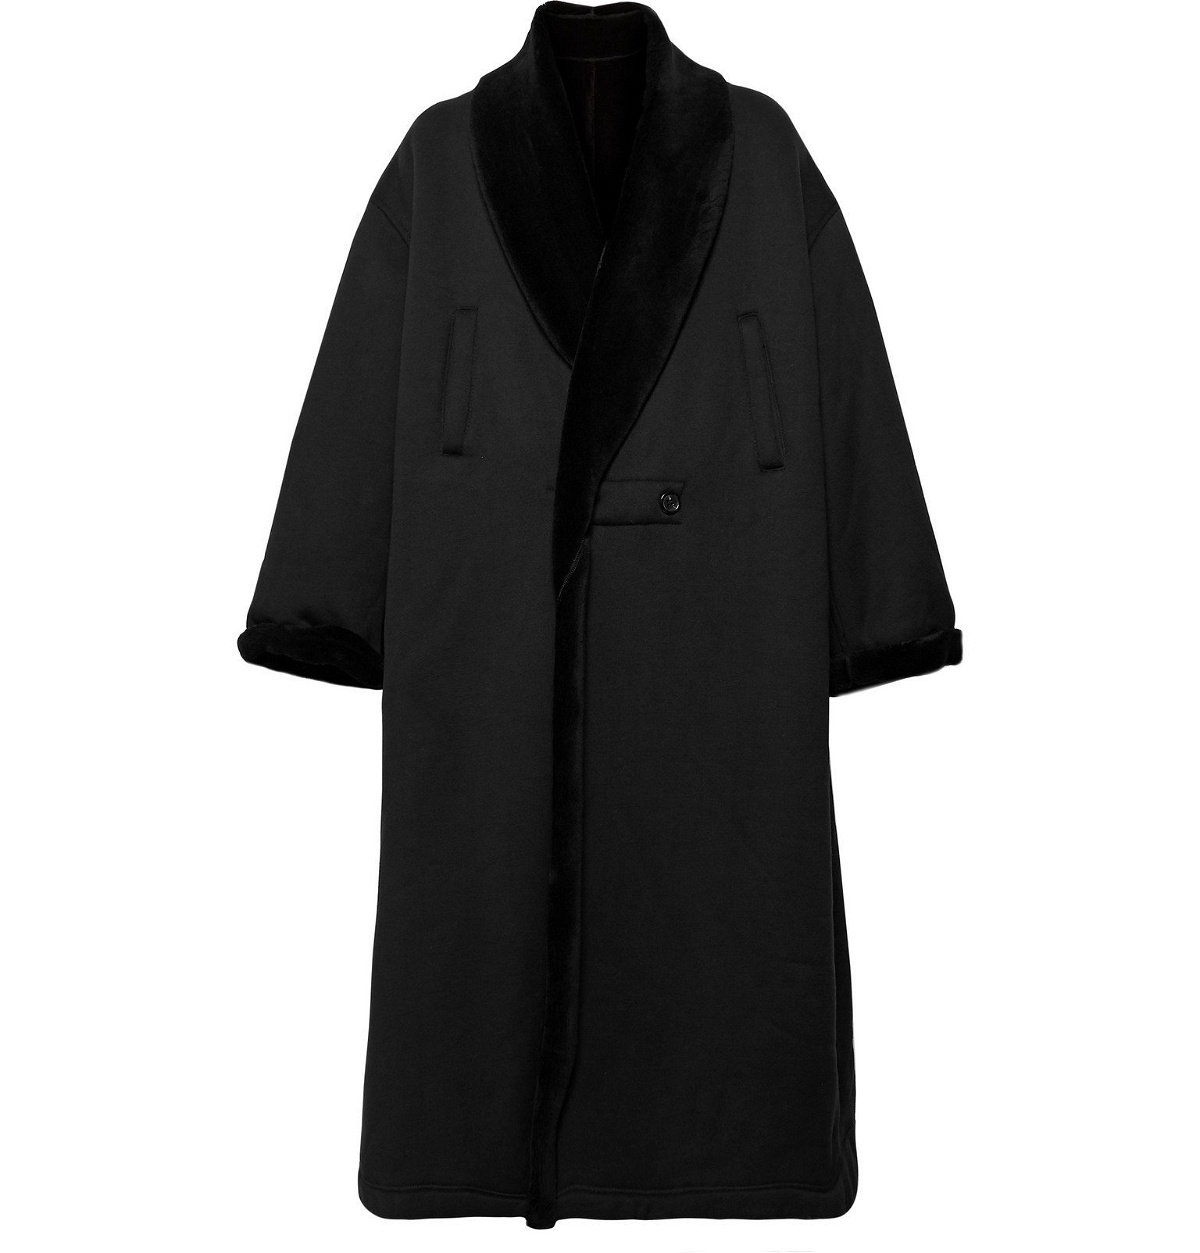 Undercover - Oversized Faux Shearling Coat - Black Undercover